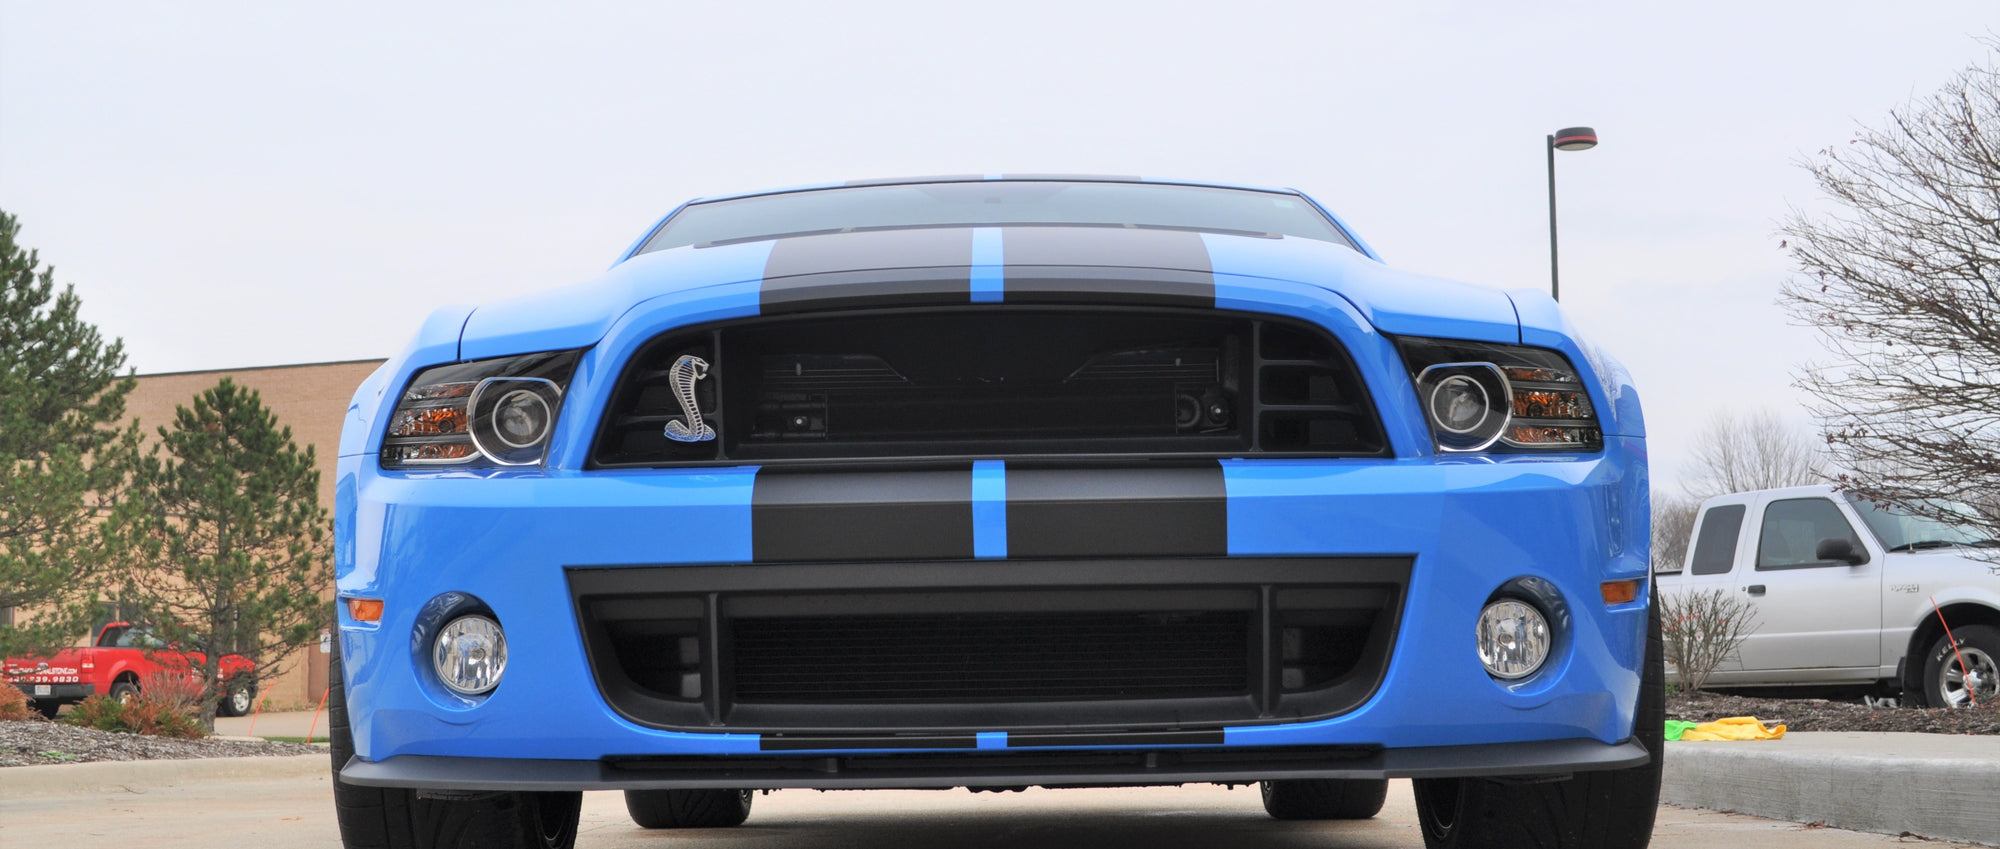 2010 Ford Mustang Shelby GT500 5.8L V8